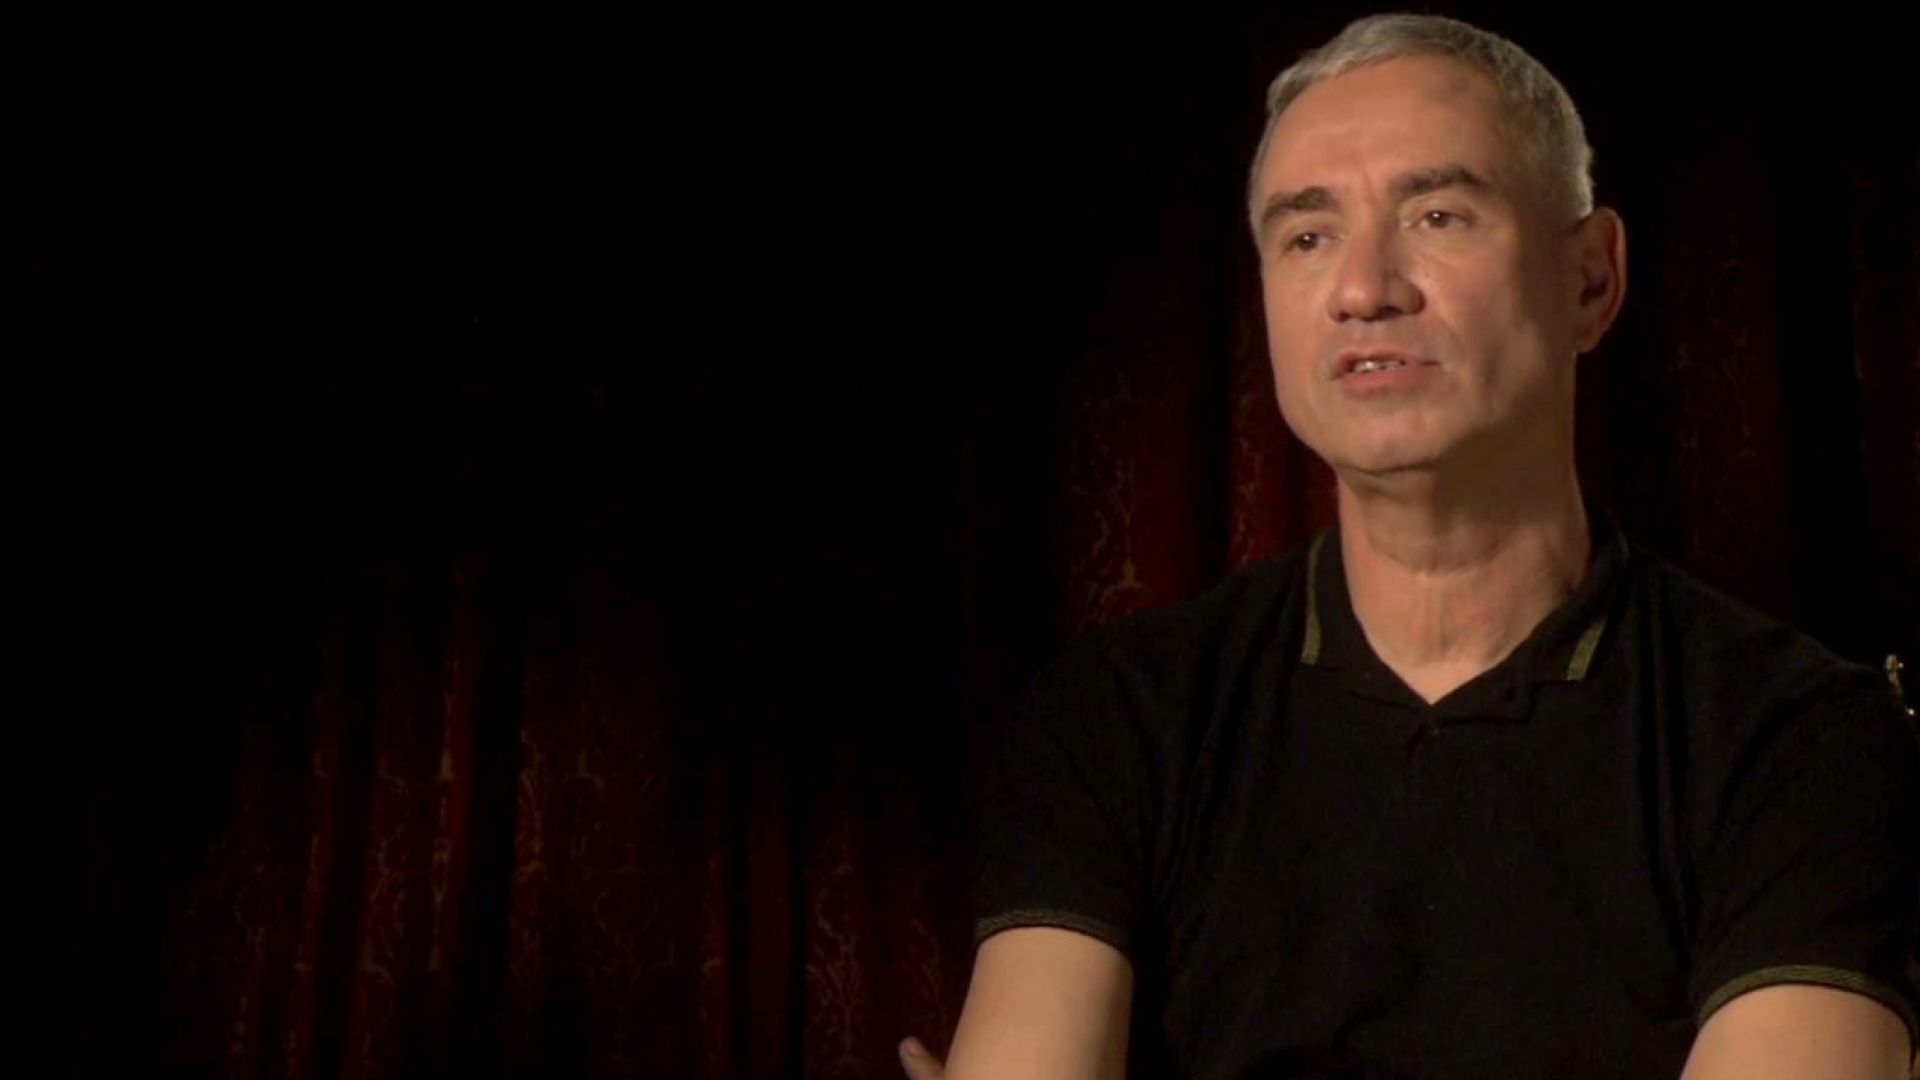 Roland Emmerich on why he wanted to make Anonymous